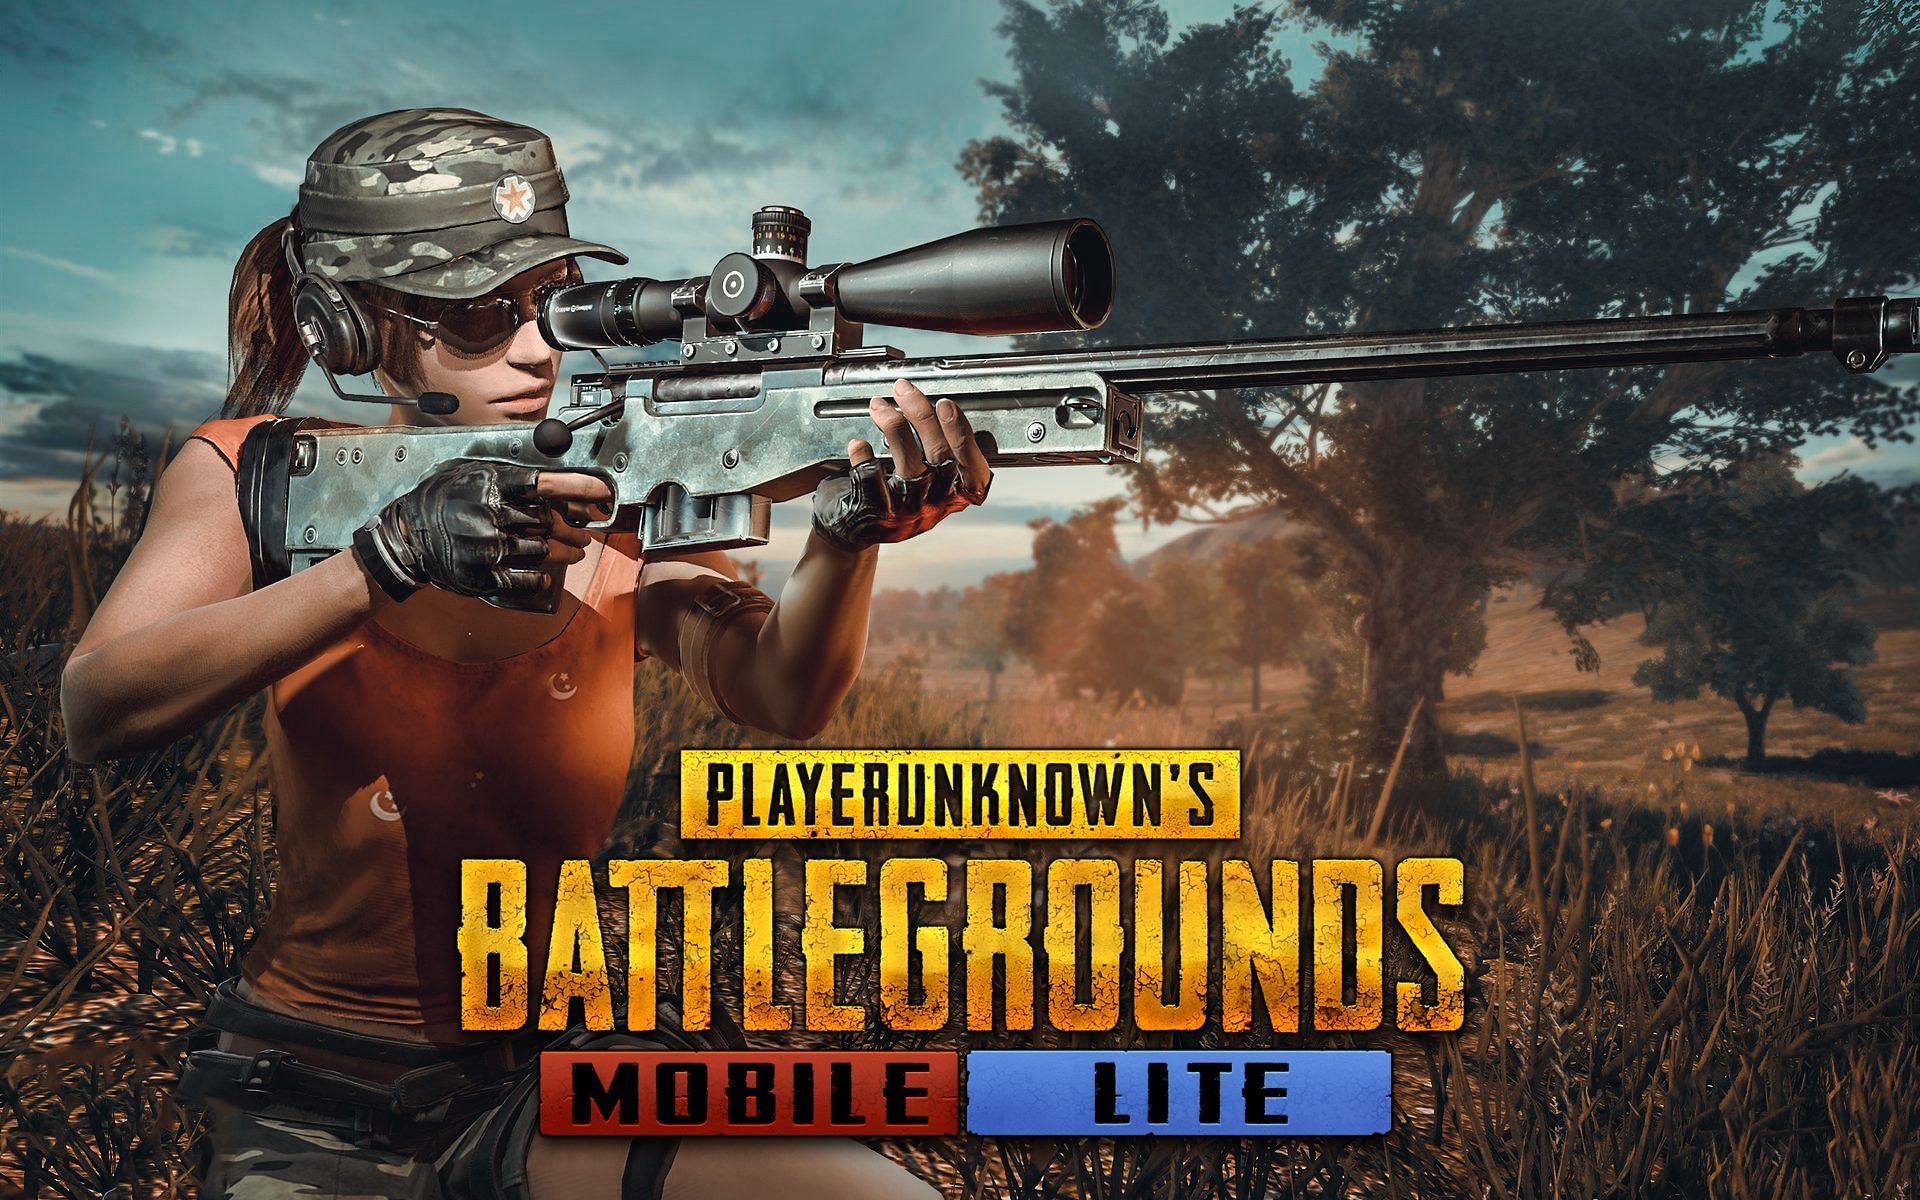 Landing spots that users can try out in PUBG Mobile Lite (Image via PUBG Mobile Lite)